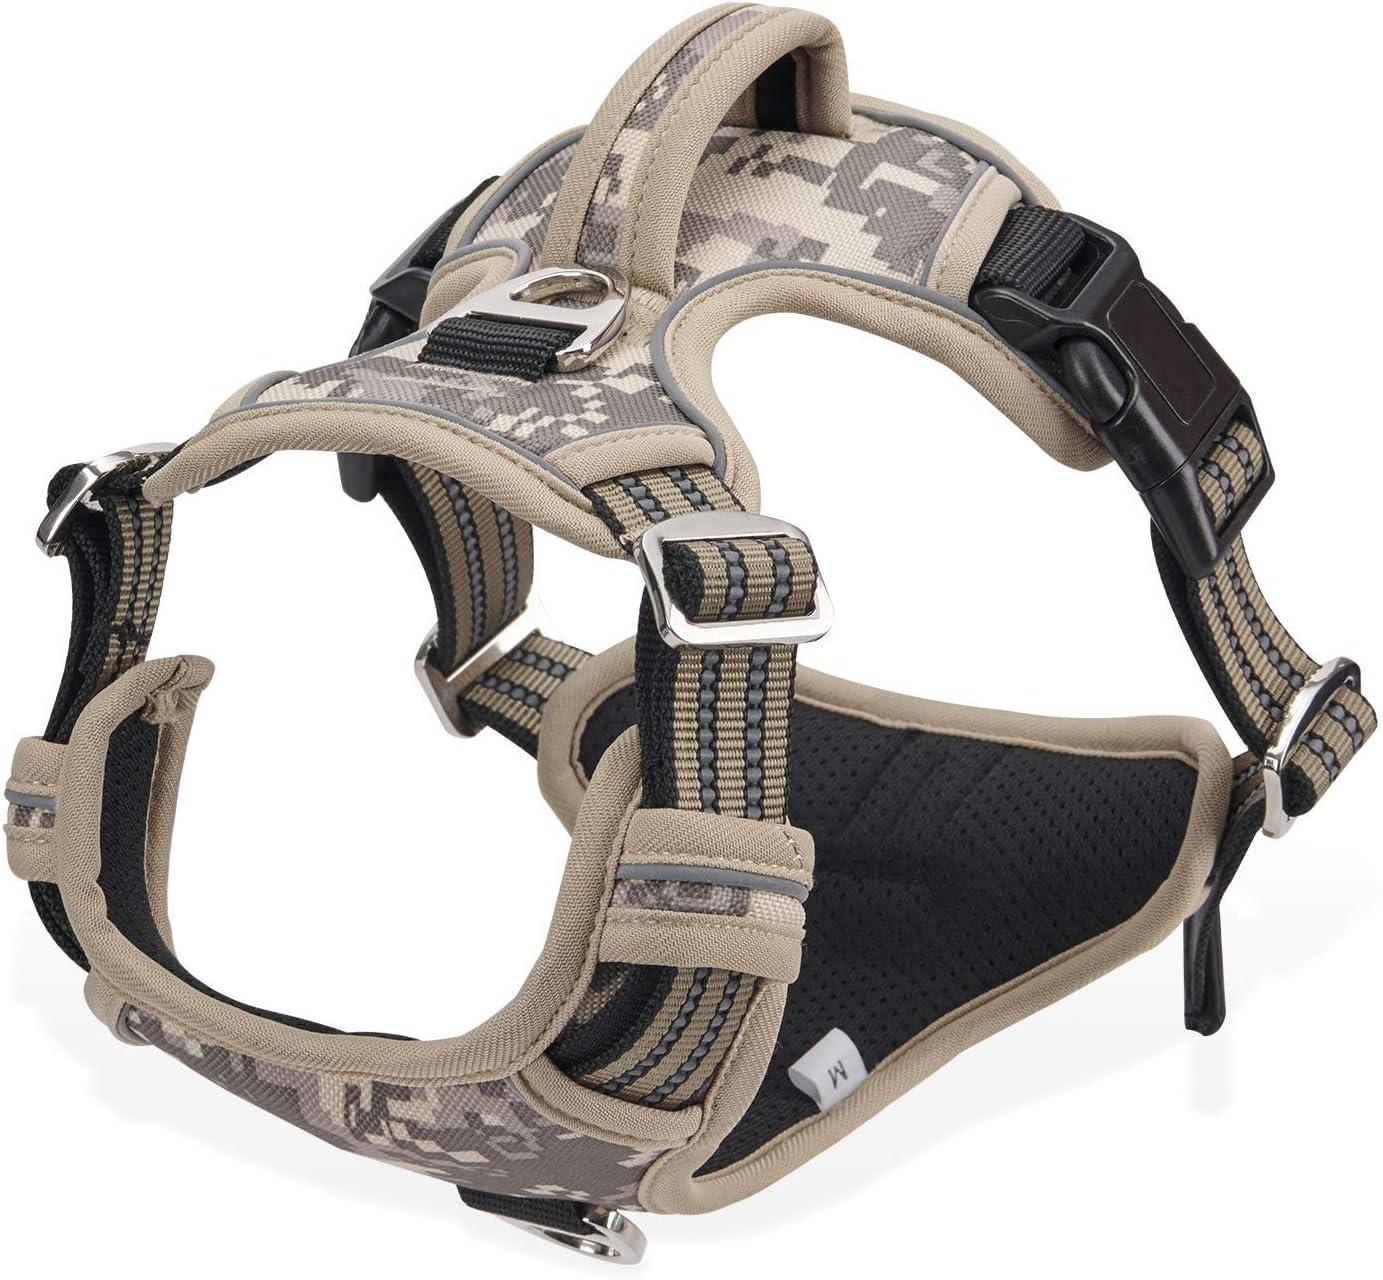 Dociote Dog Harness with 2 Metal Leash